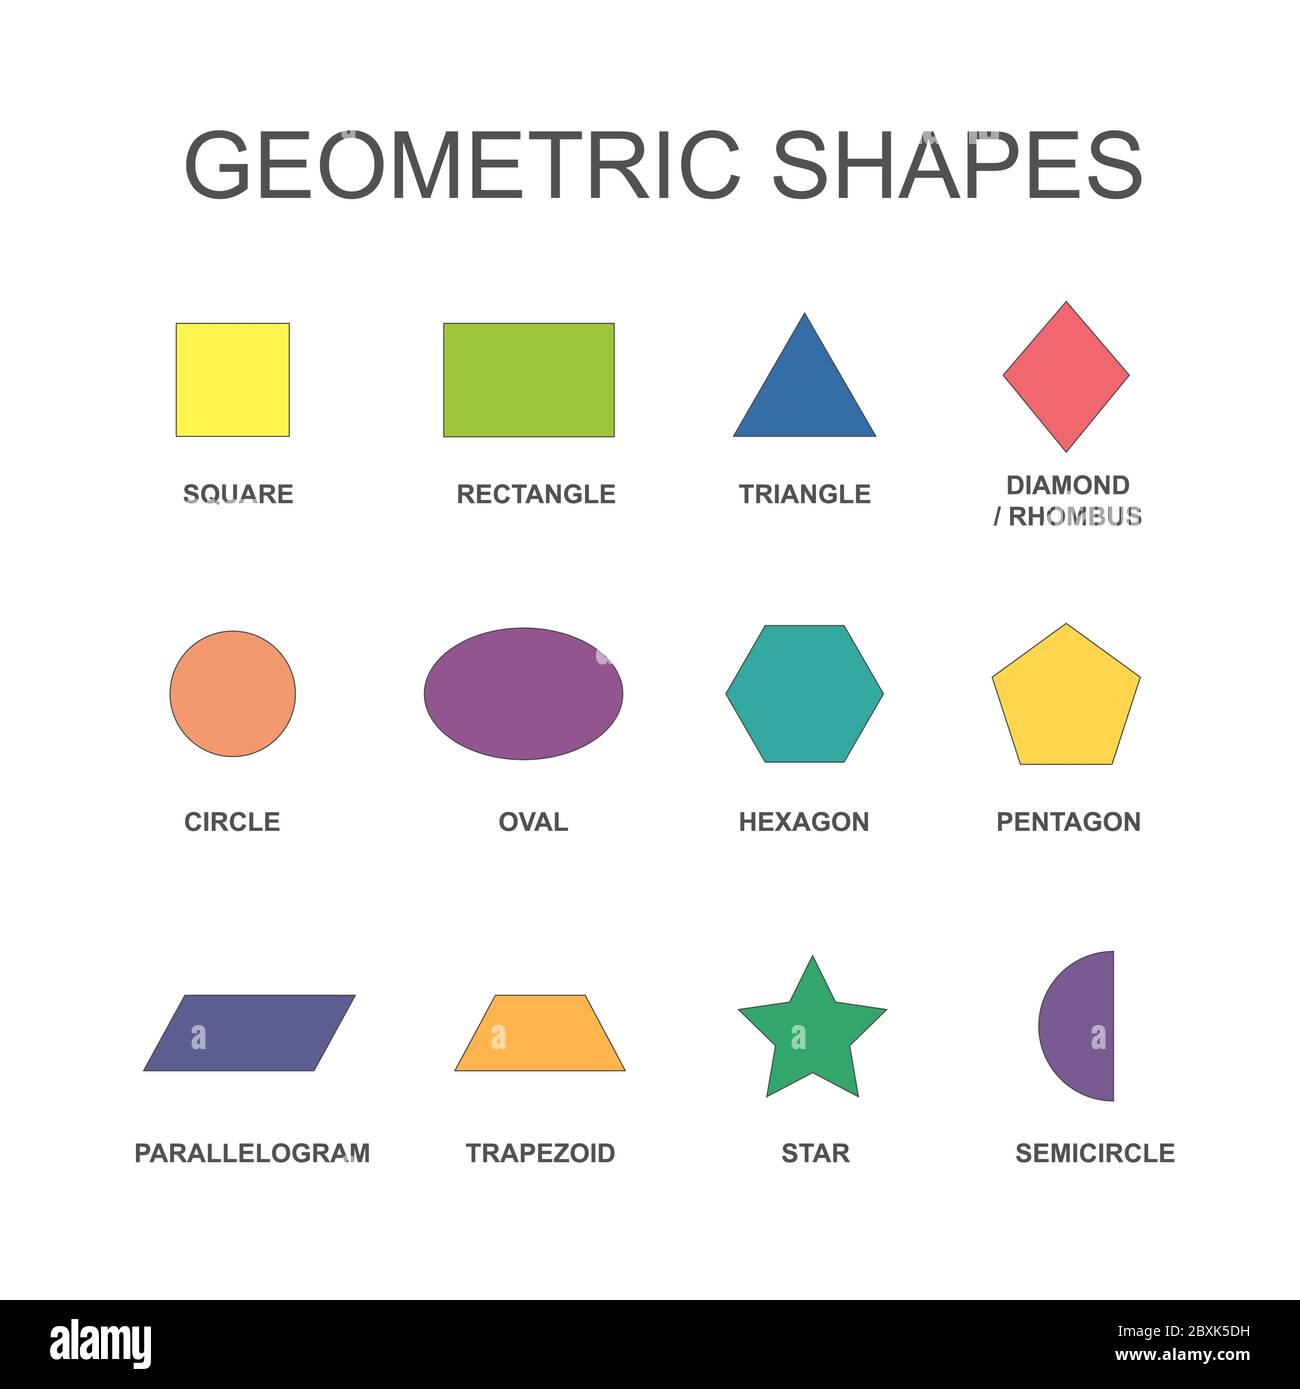 Rectangle - Shapes are all around our world